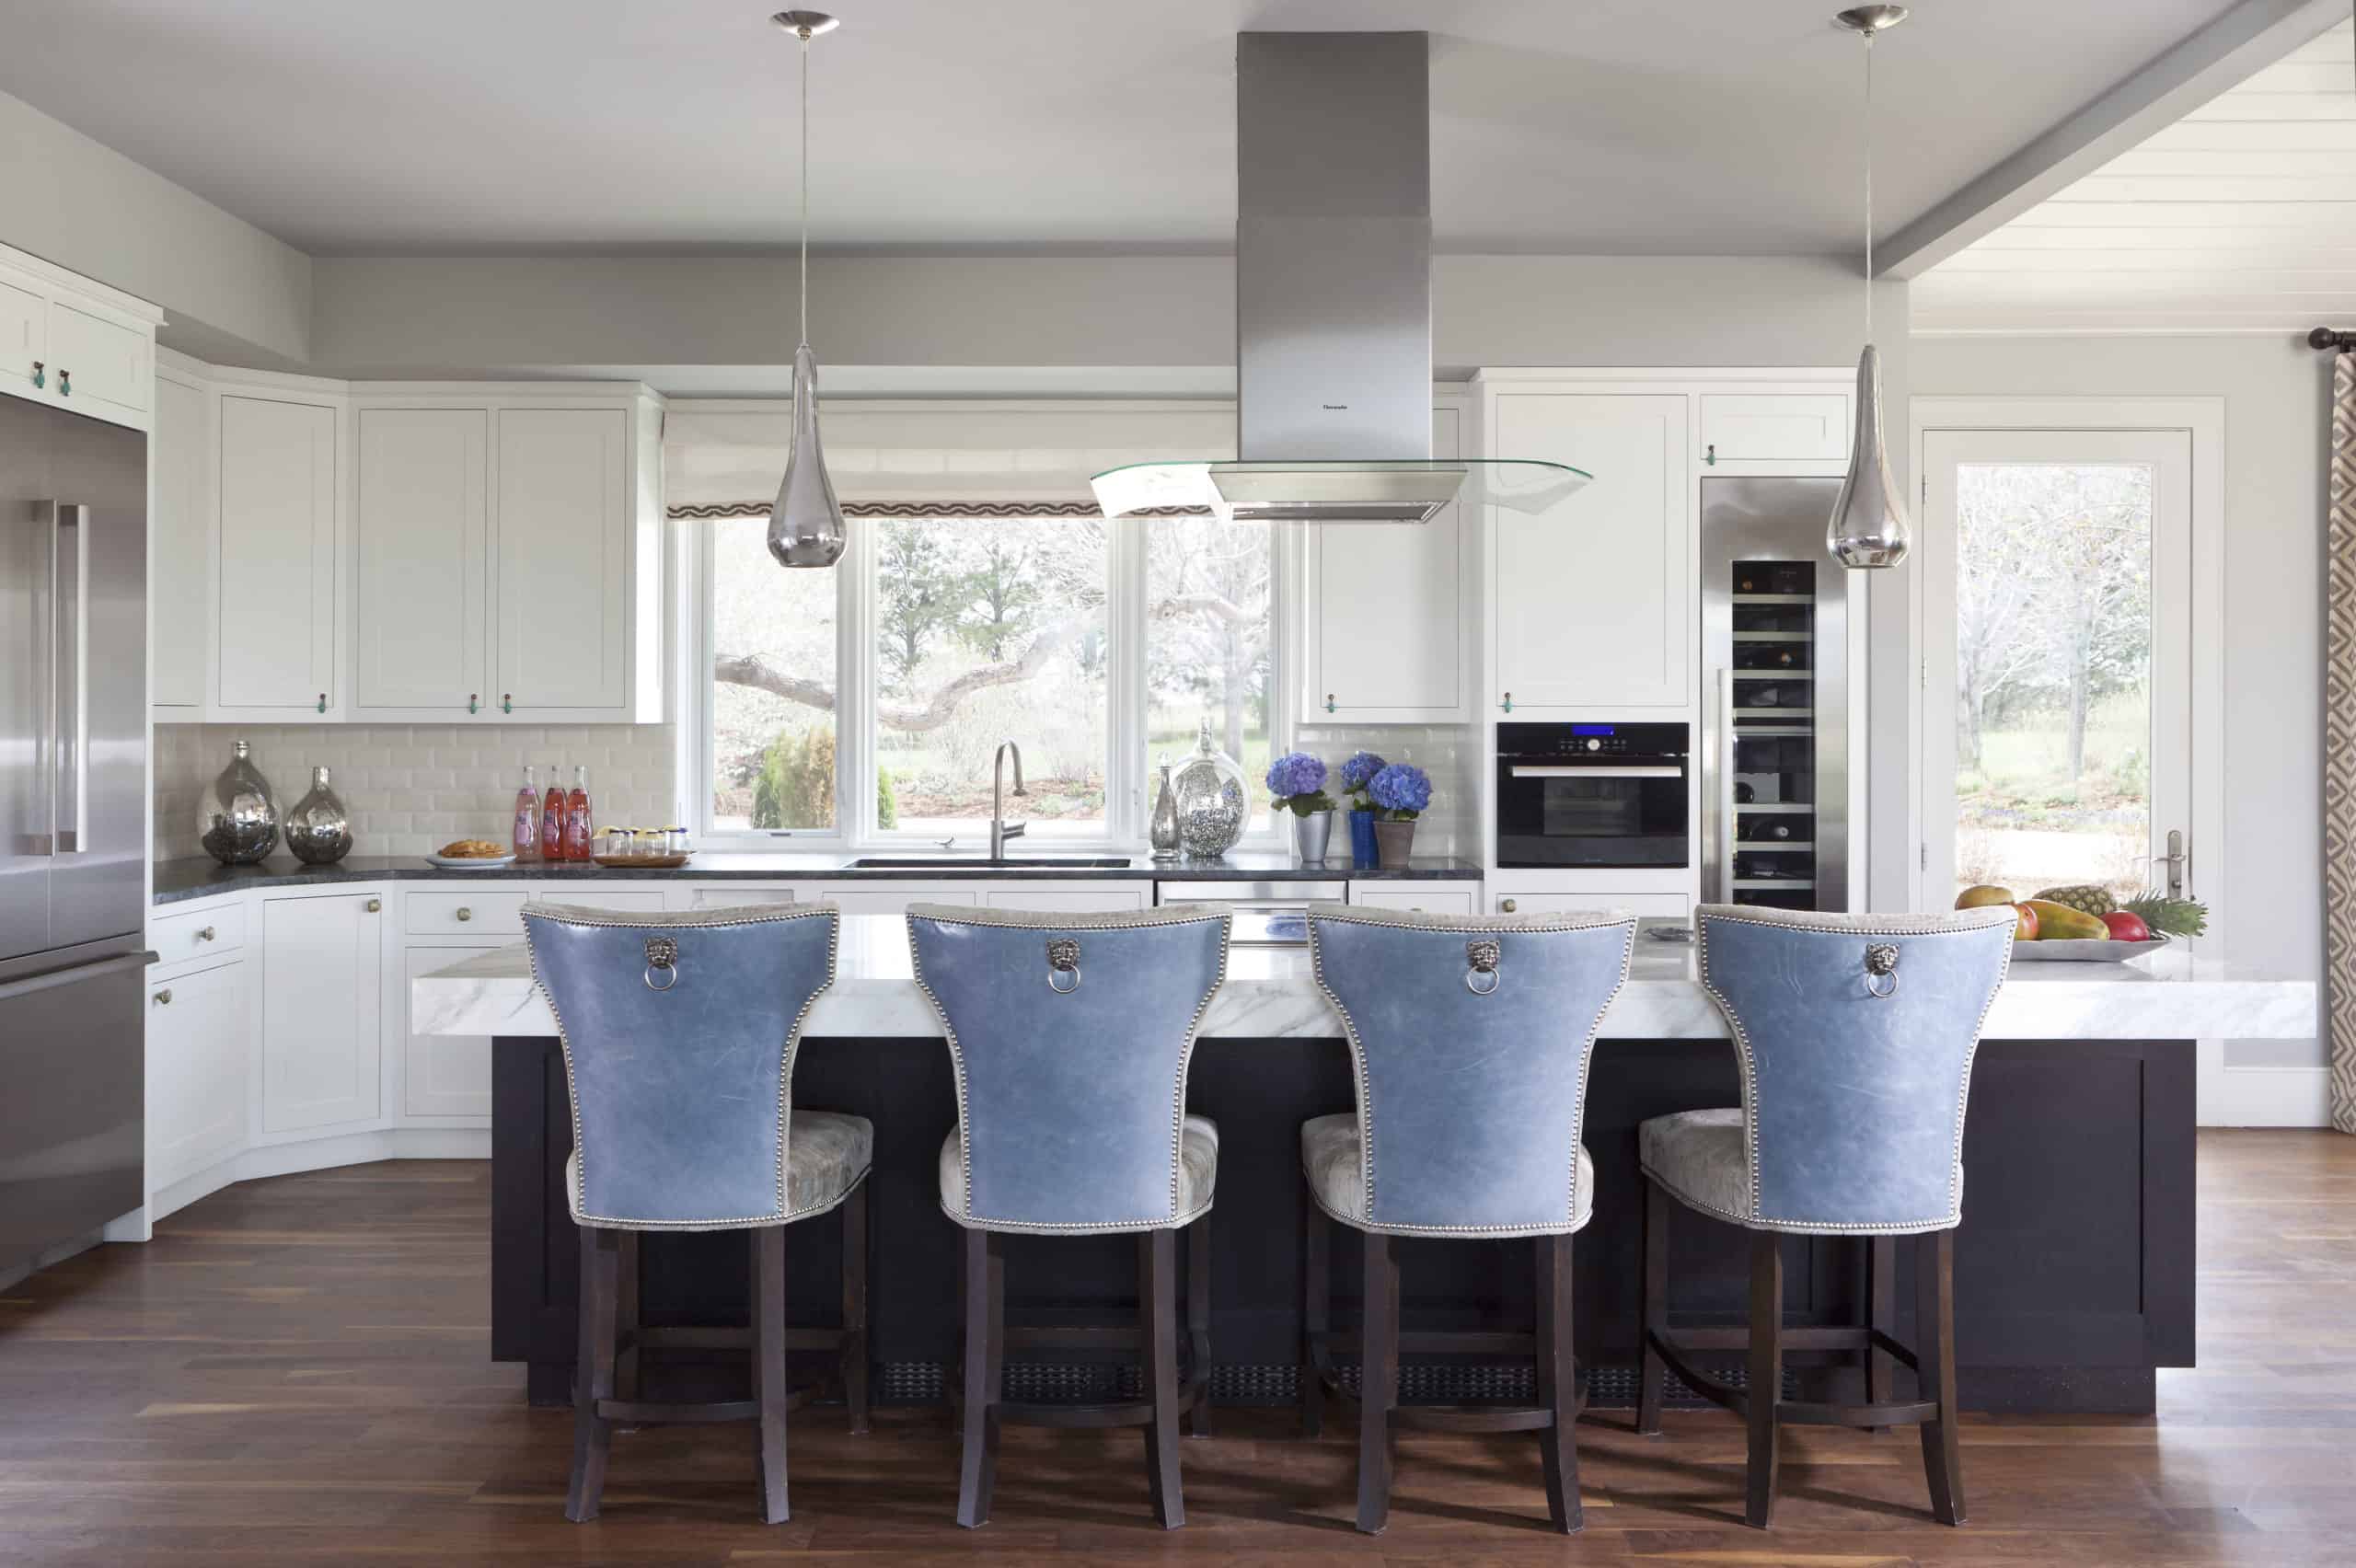 Large, thick kitchen island with custom blue leather stools and head to head nailheads